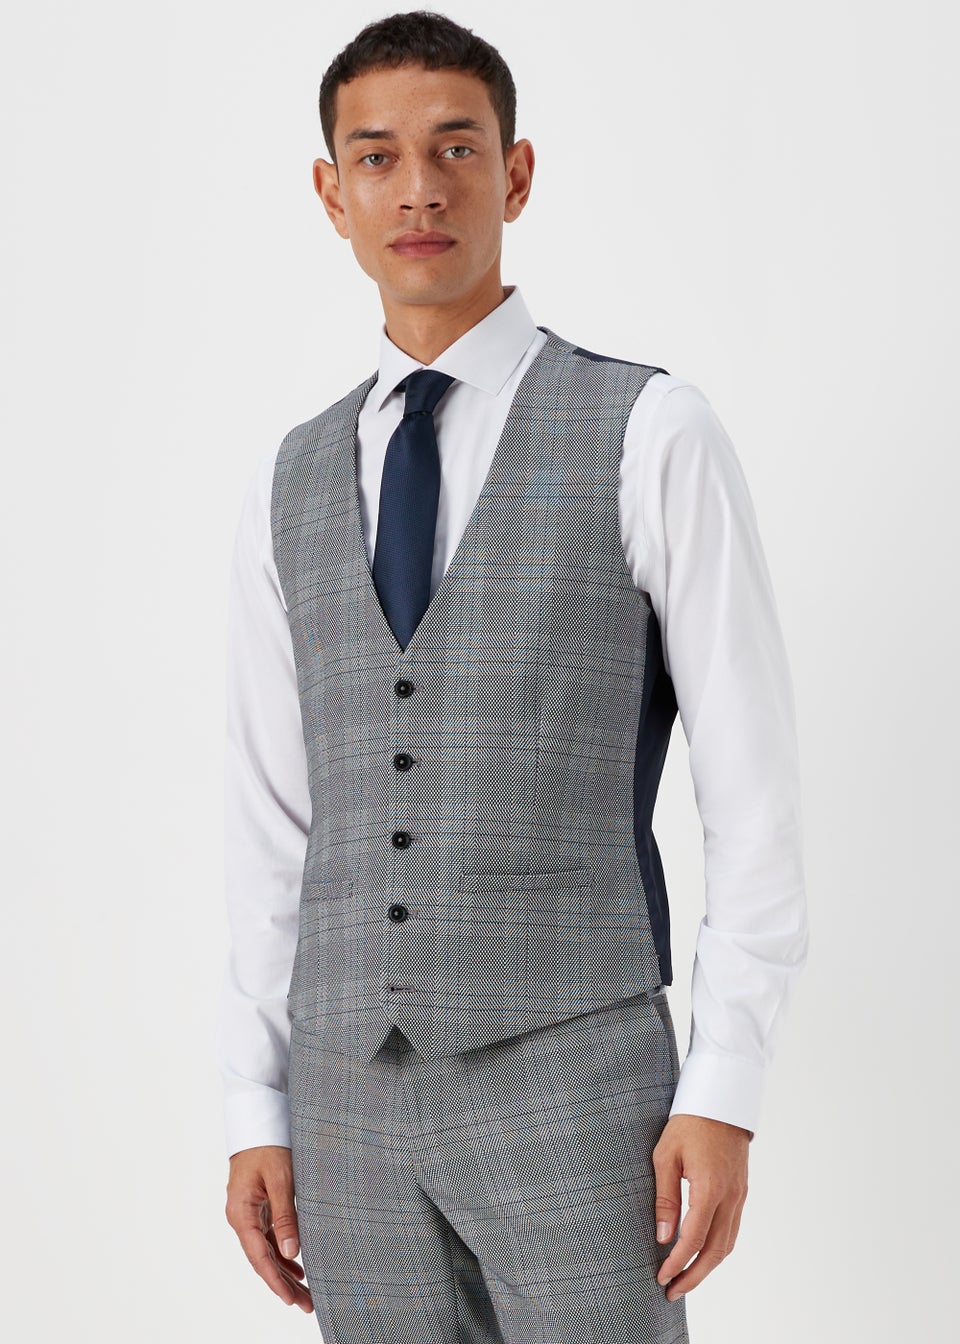 Taylor & Wright Forth Grey Check Suit Waistcoat